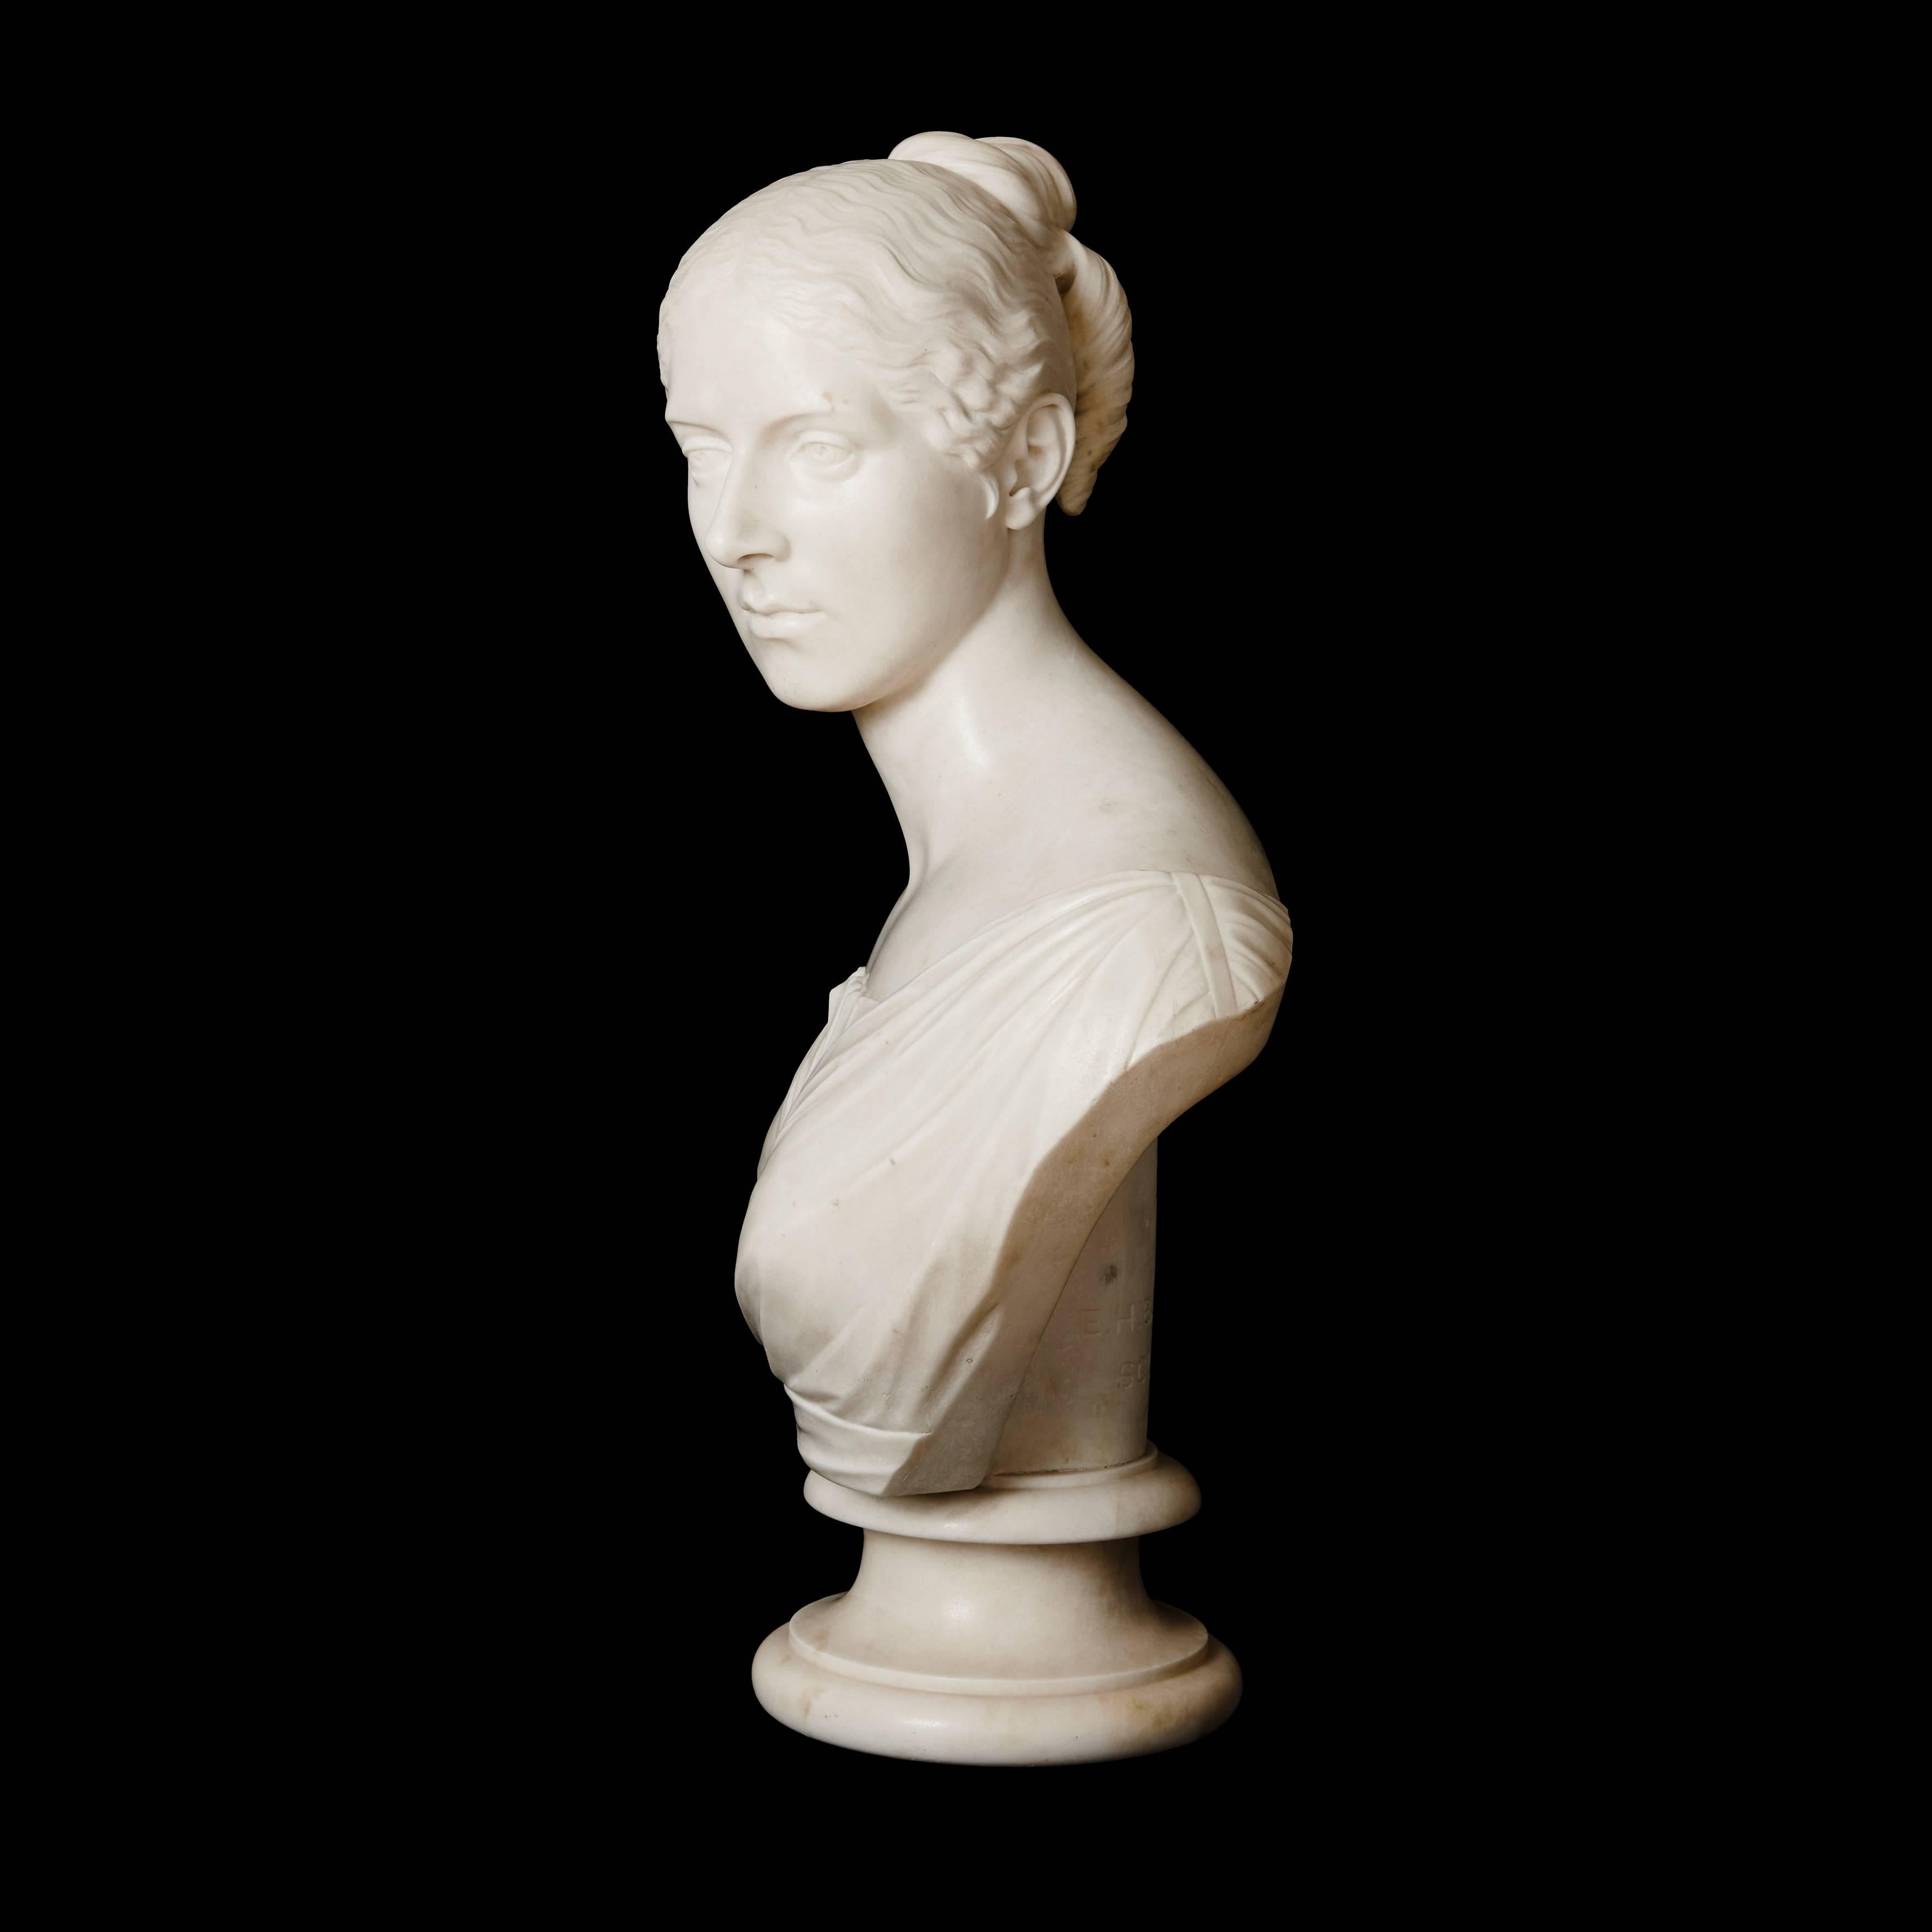 Signed and dated 'E. H. BAILY. R.A. / SCULP. 1845.' on a circular socle.

This beautiful antique bust is a brilliant example of Baily's high quality sculpture, which remains famous for its elegance and refined naturalism.